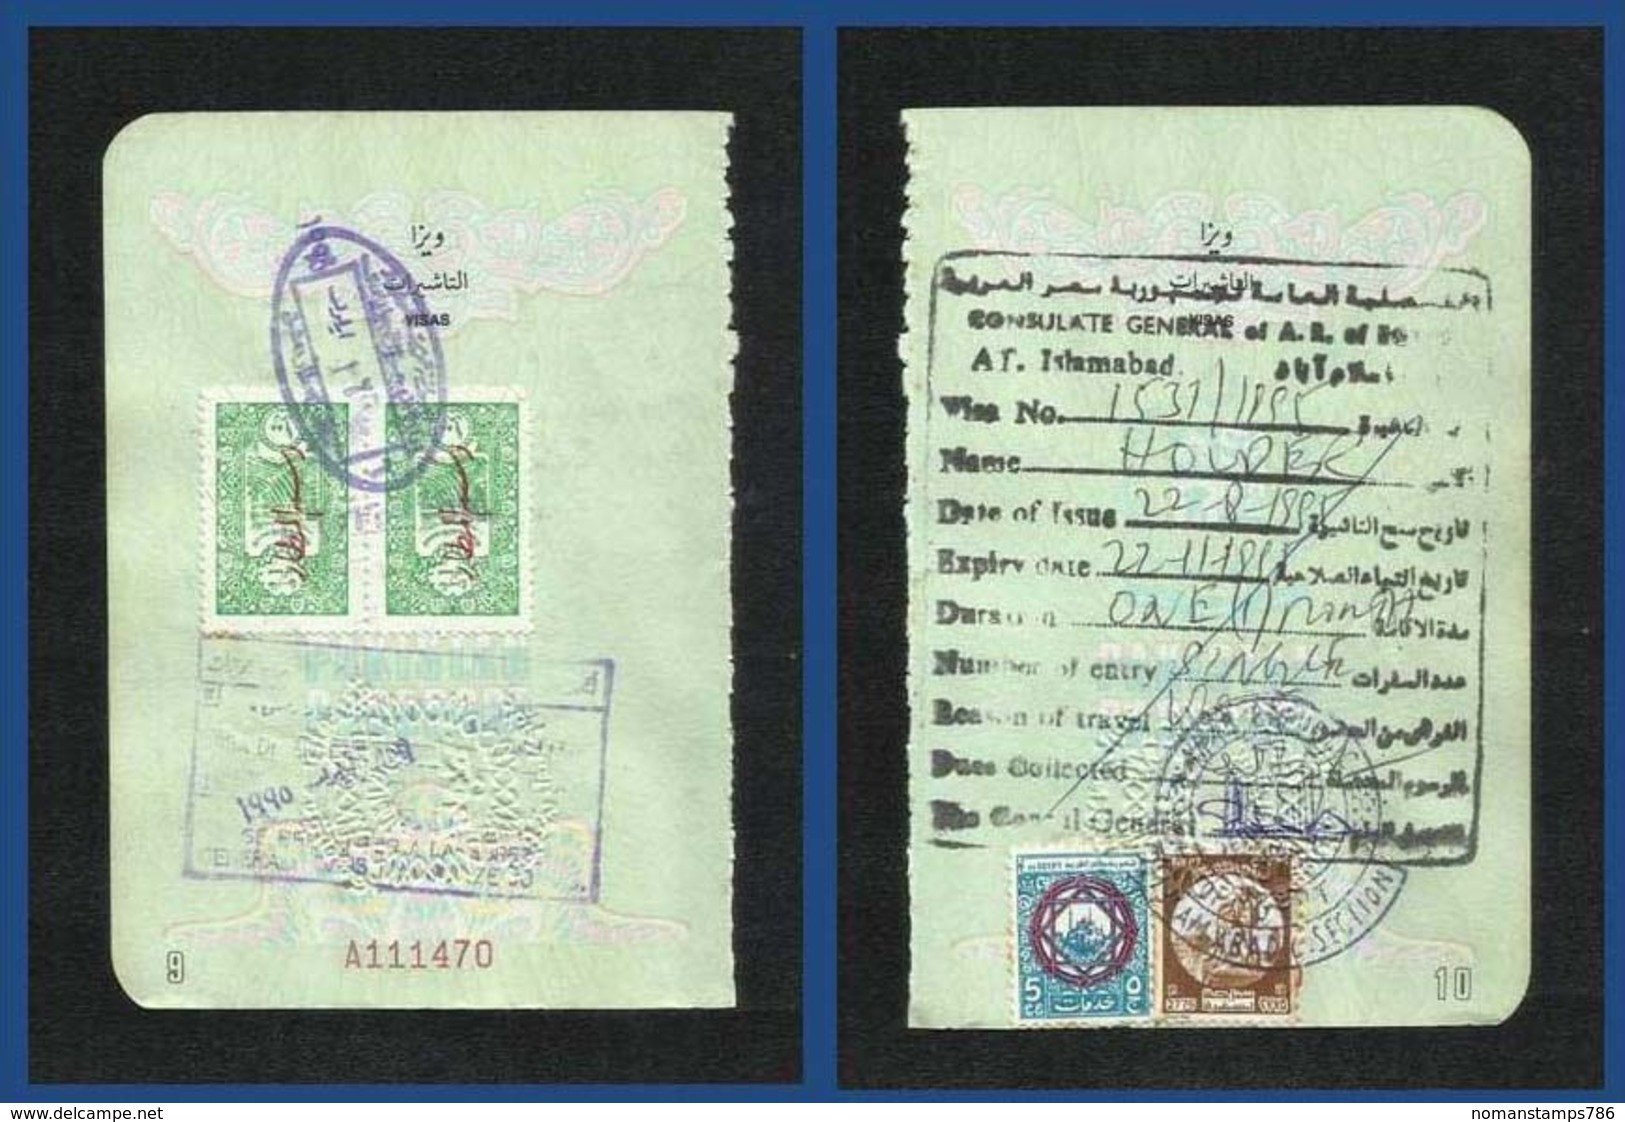 Syria 2 Overprint Revenue With Egypt Revenue Stamps On Used Passport Visas Page - Syrië